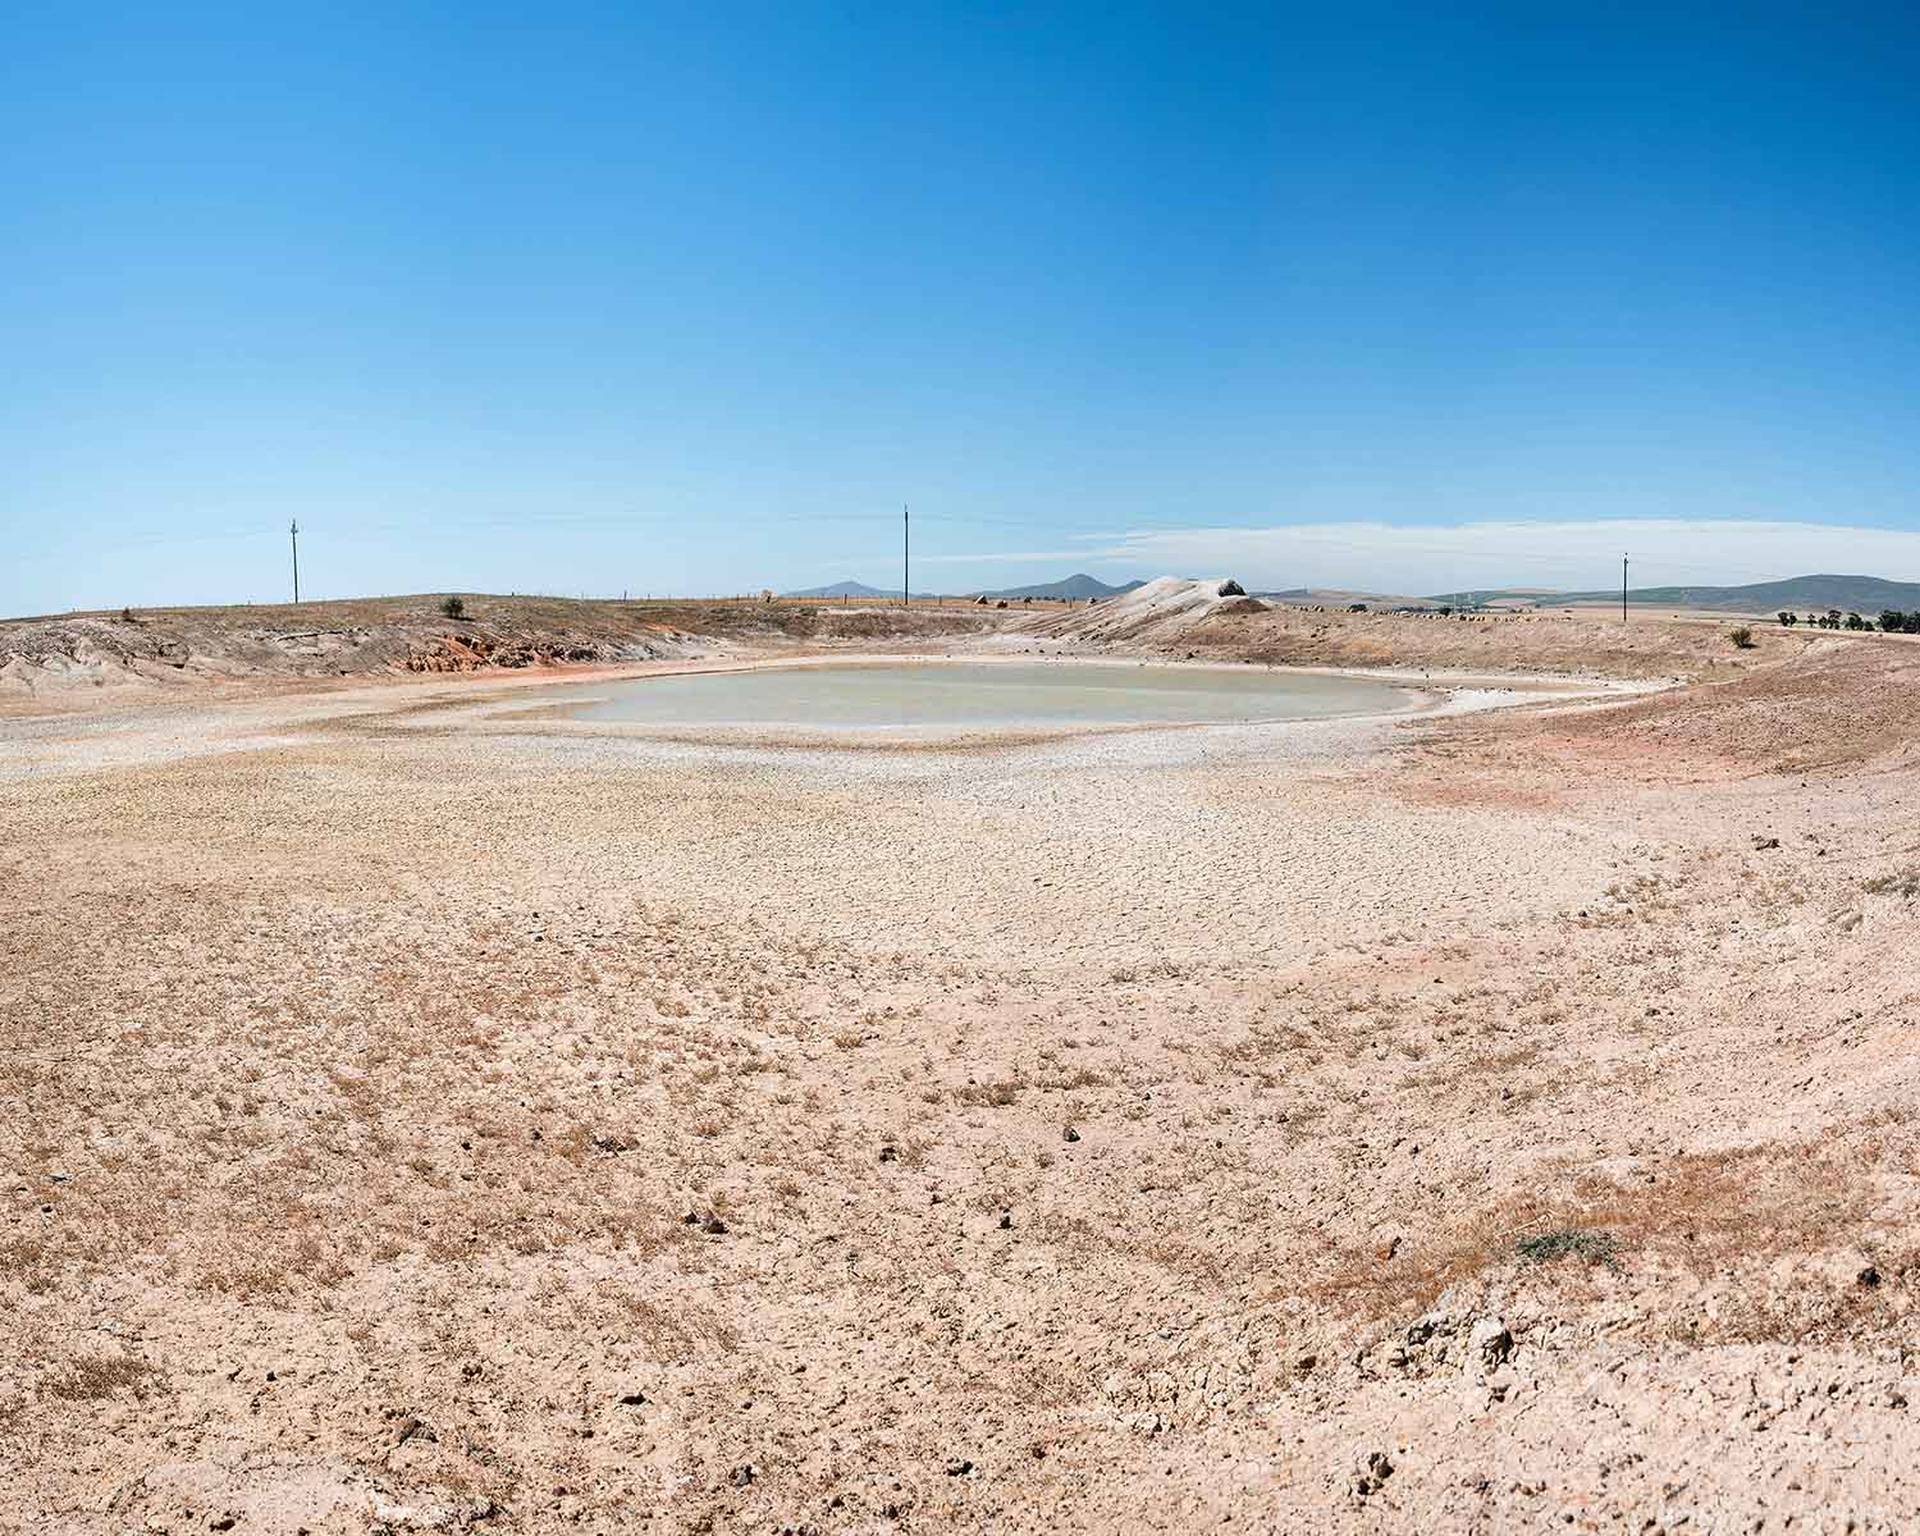 A dried-out dam, which speaks for itself, allows for the absurdity in the previous two images to be highlighted.